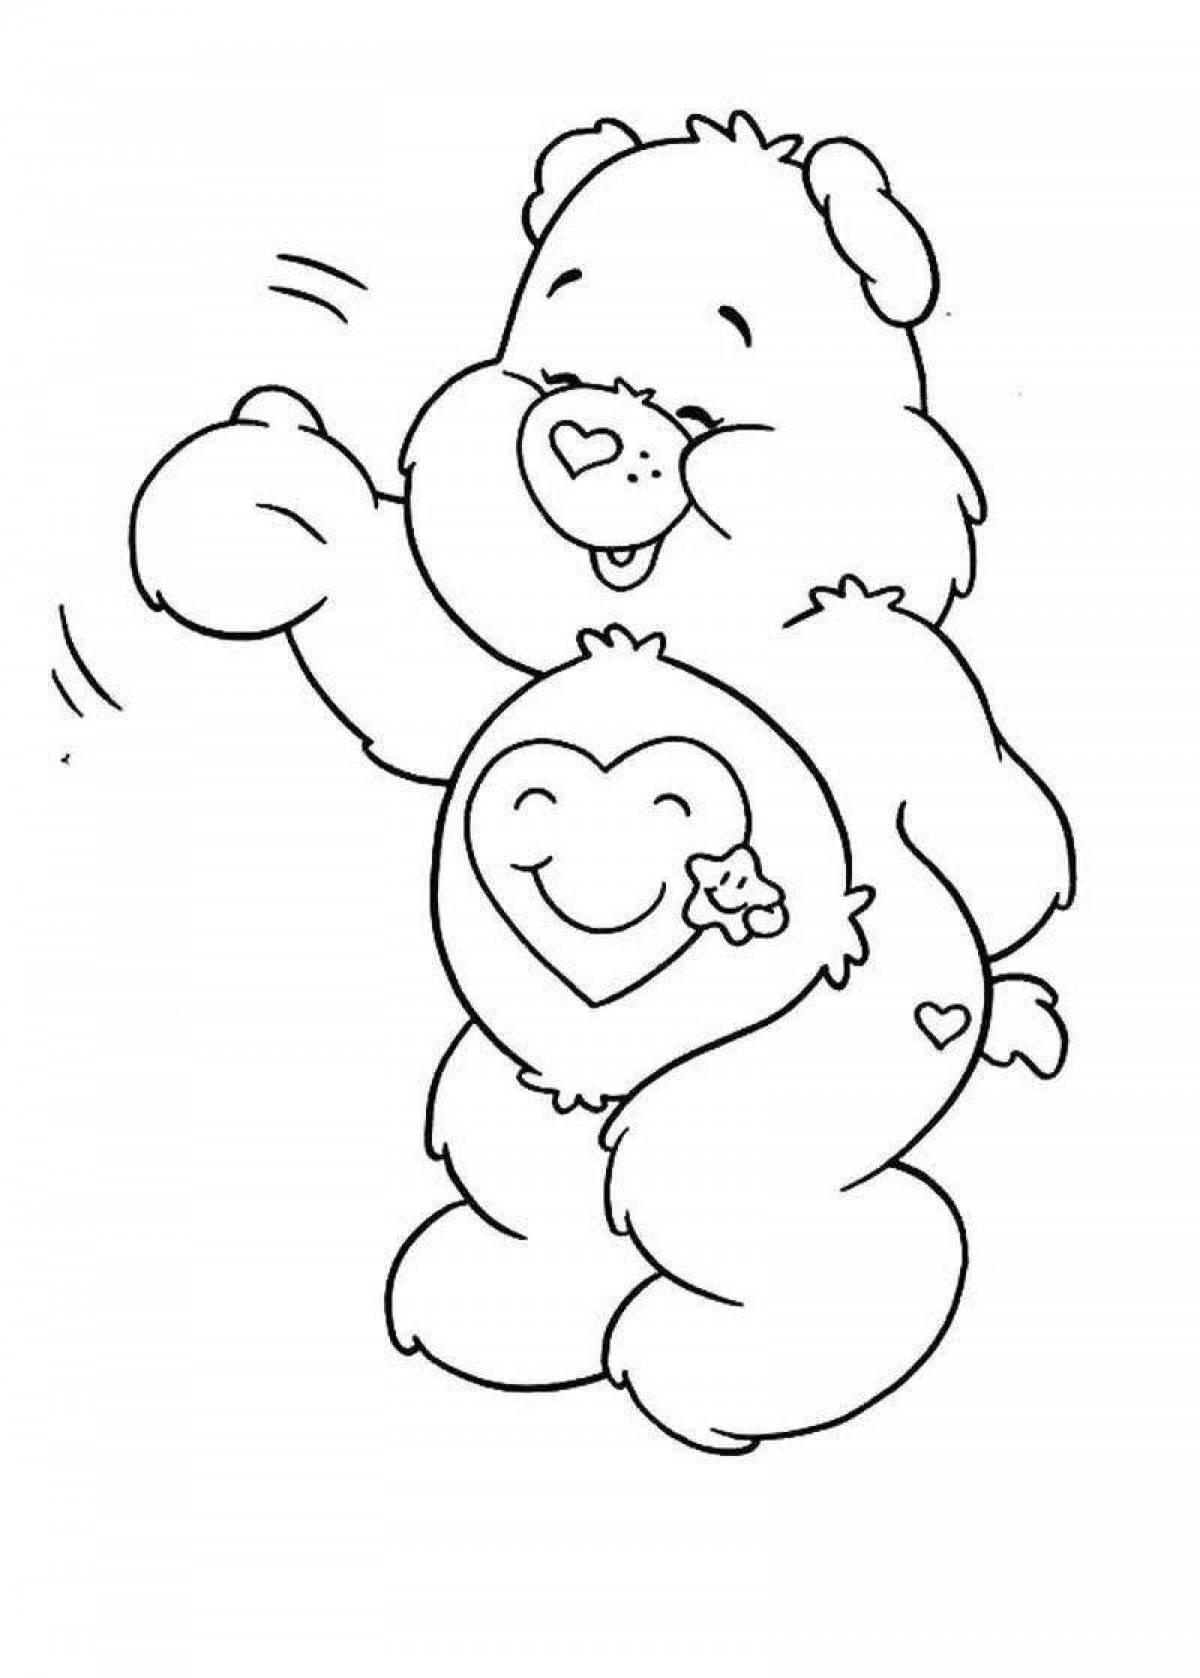 Adorable bear and rabbit coloring book